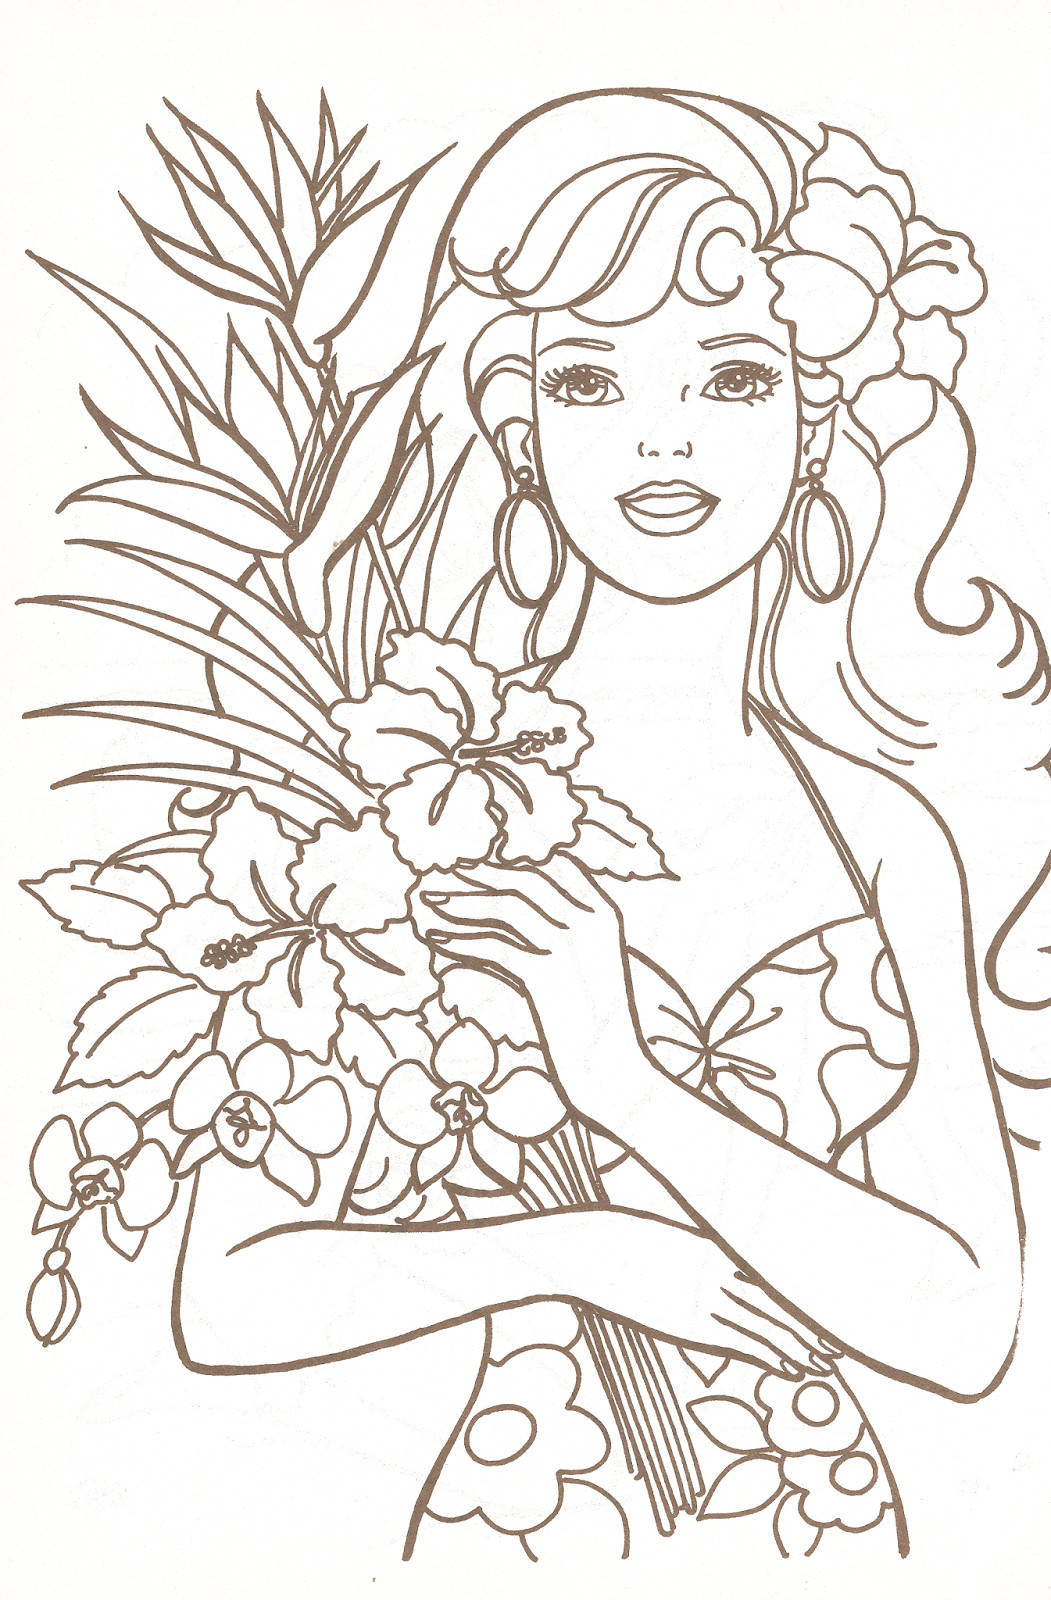 Barbie Coloring Pages Free Printable
 Miss Missy Paper Dolls Barbie Coloring Pages Part 1